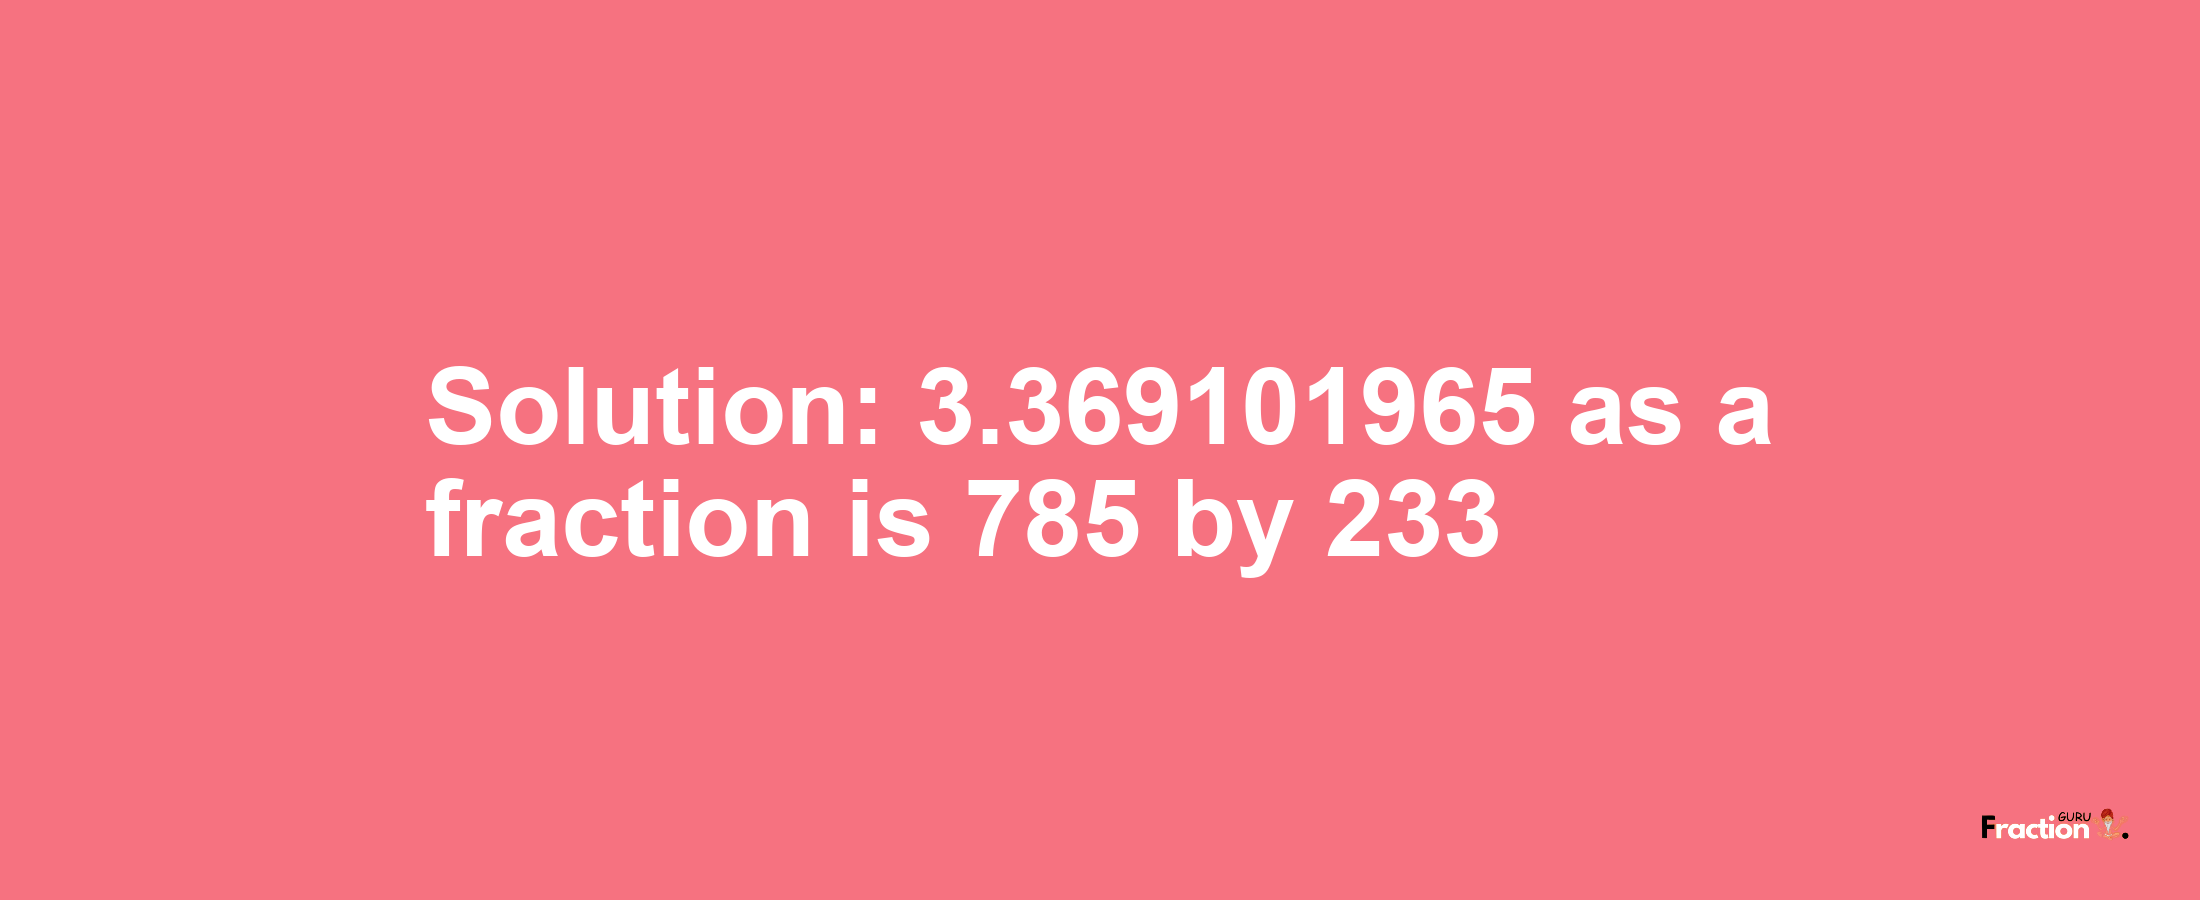 Solution:3.369101965 as a fraction is 785/233